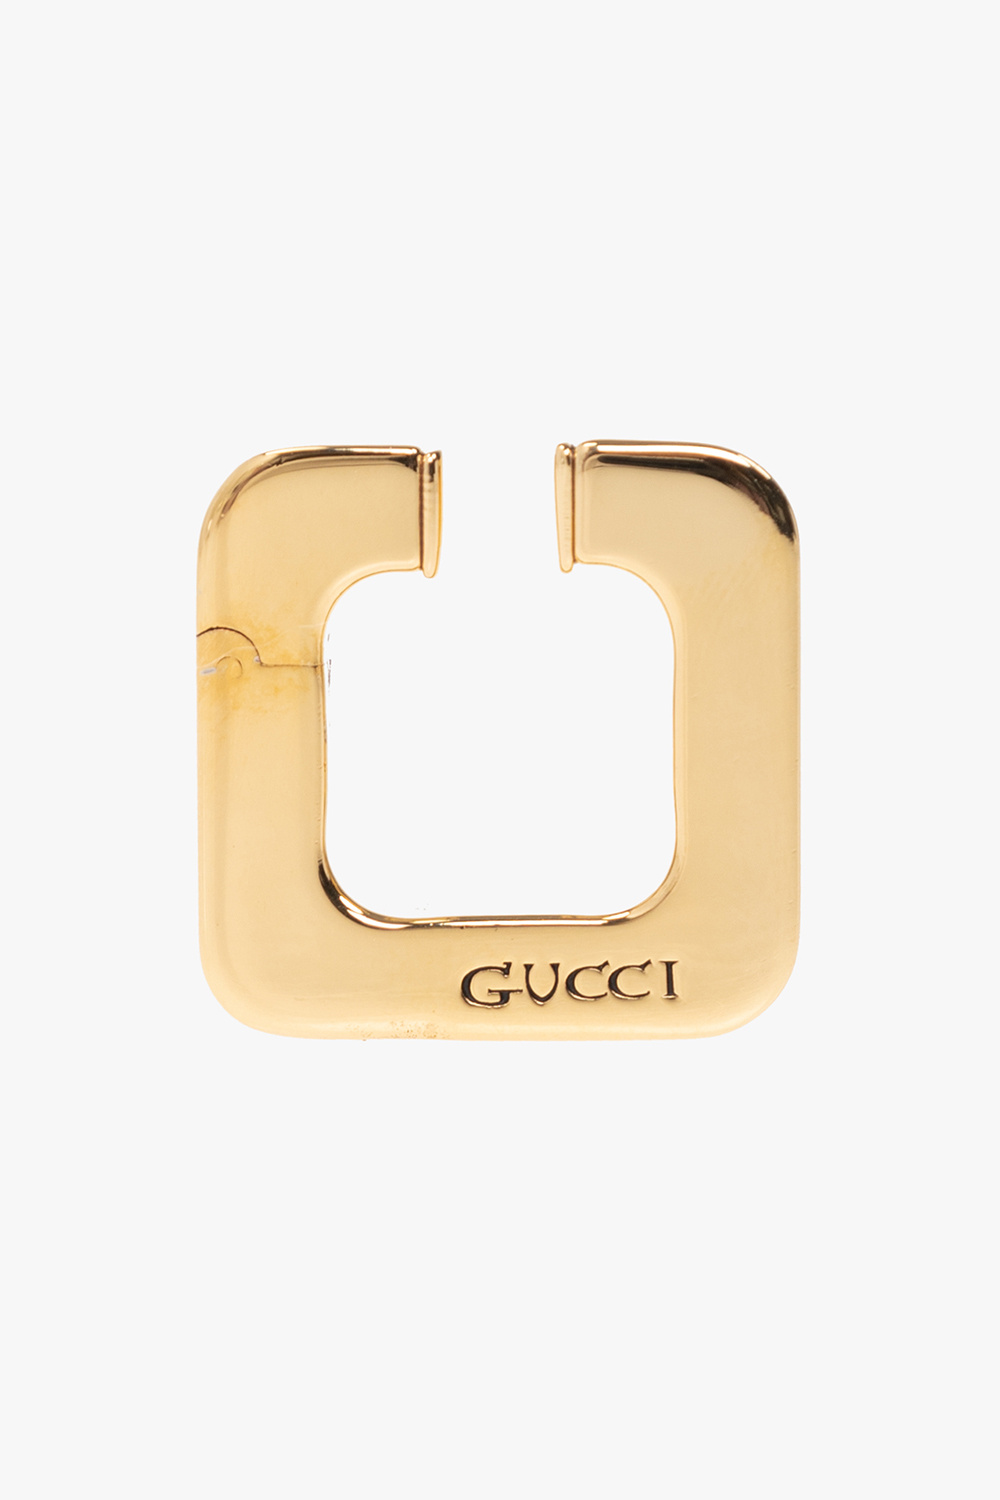 Gucci branding on temples - Gold Ear cuff with logo Gucci -  InteragencyboardShops HK